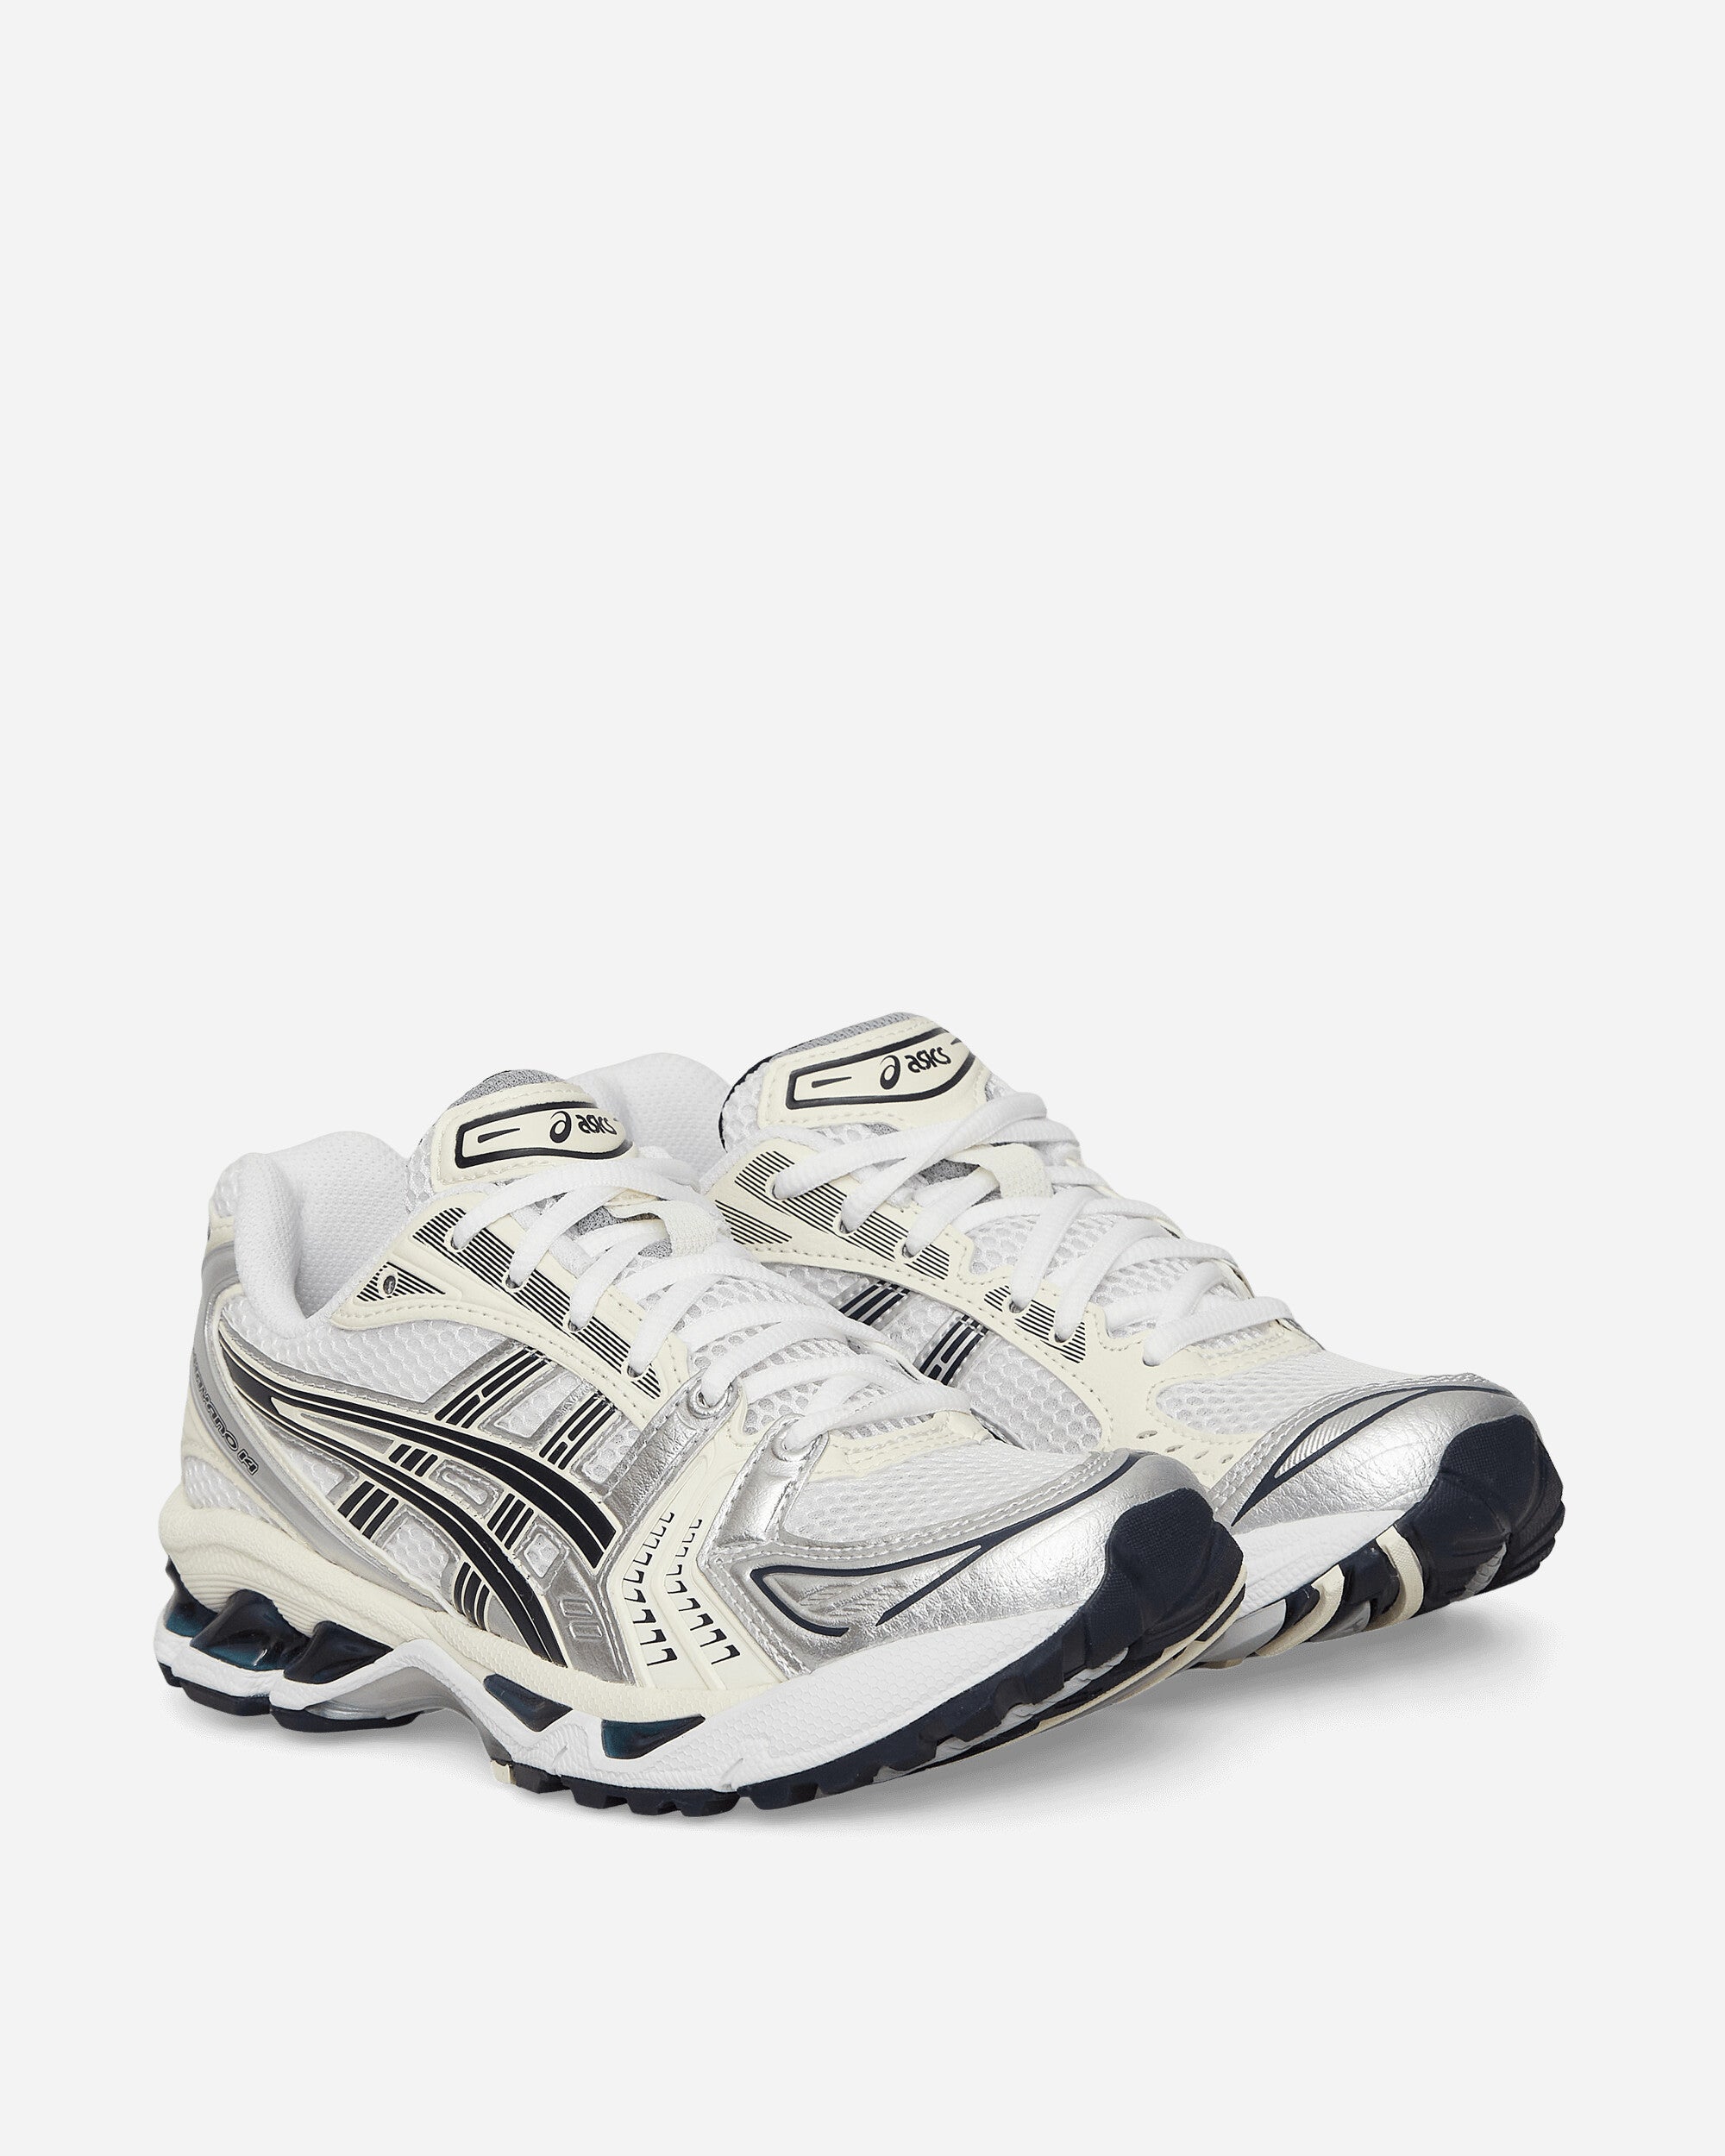 Asics Wmns Gel-Kayano 14 White/Midnight Sneakers Low 1202A056-109